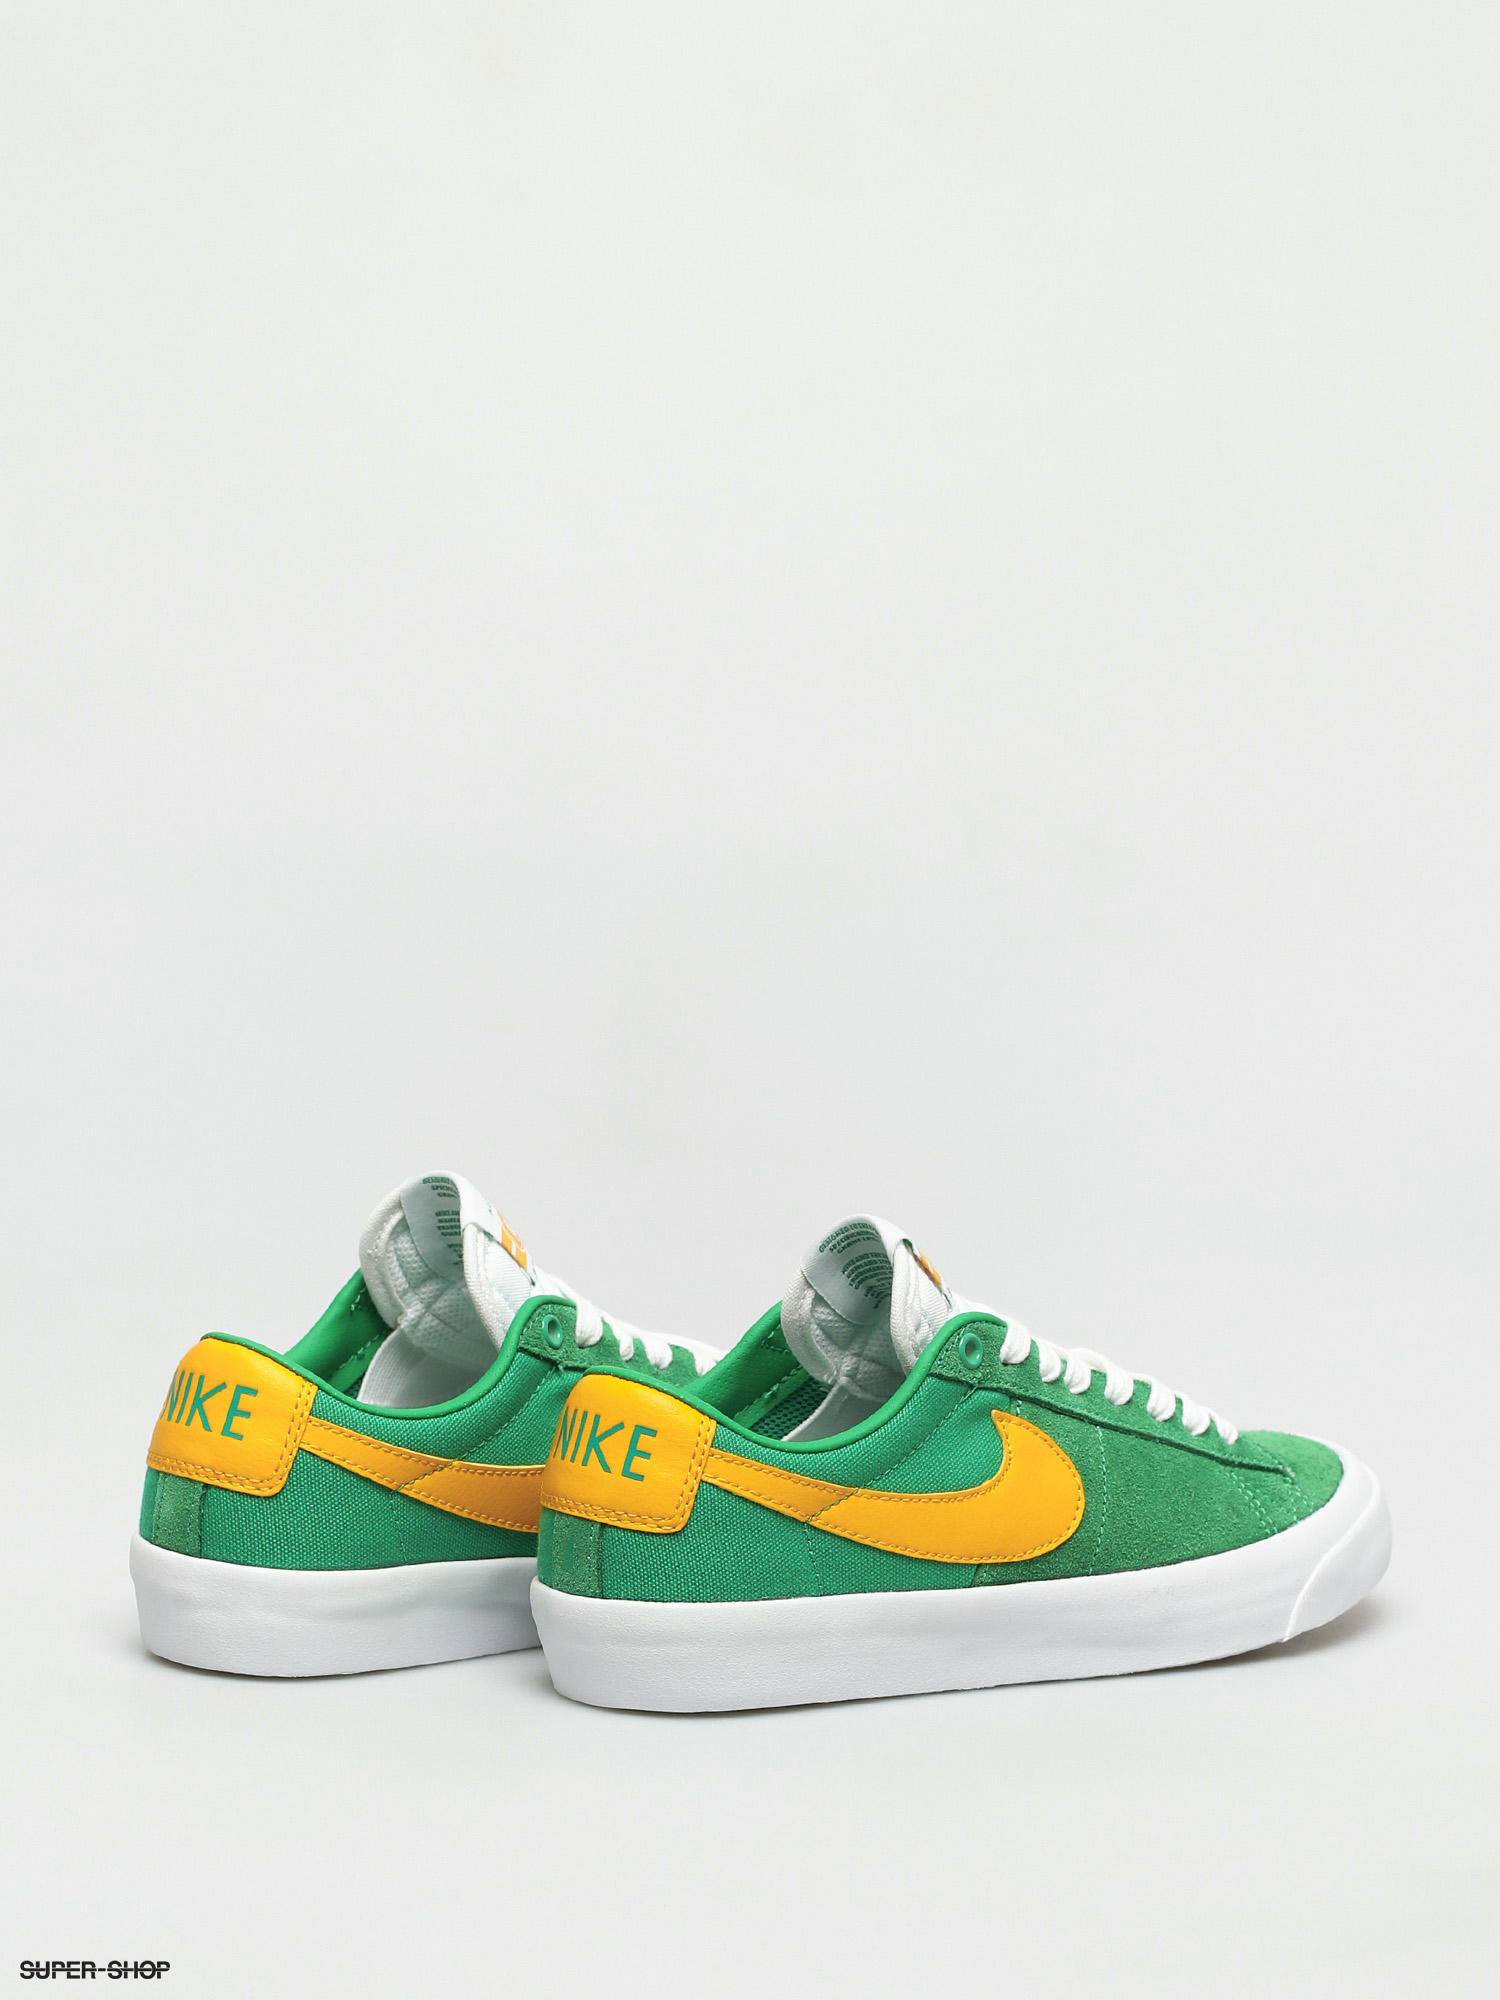 Nike SB Zoom Low Shoes (lucky green/university gold black